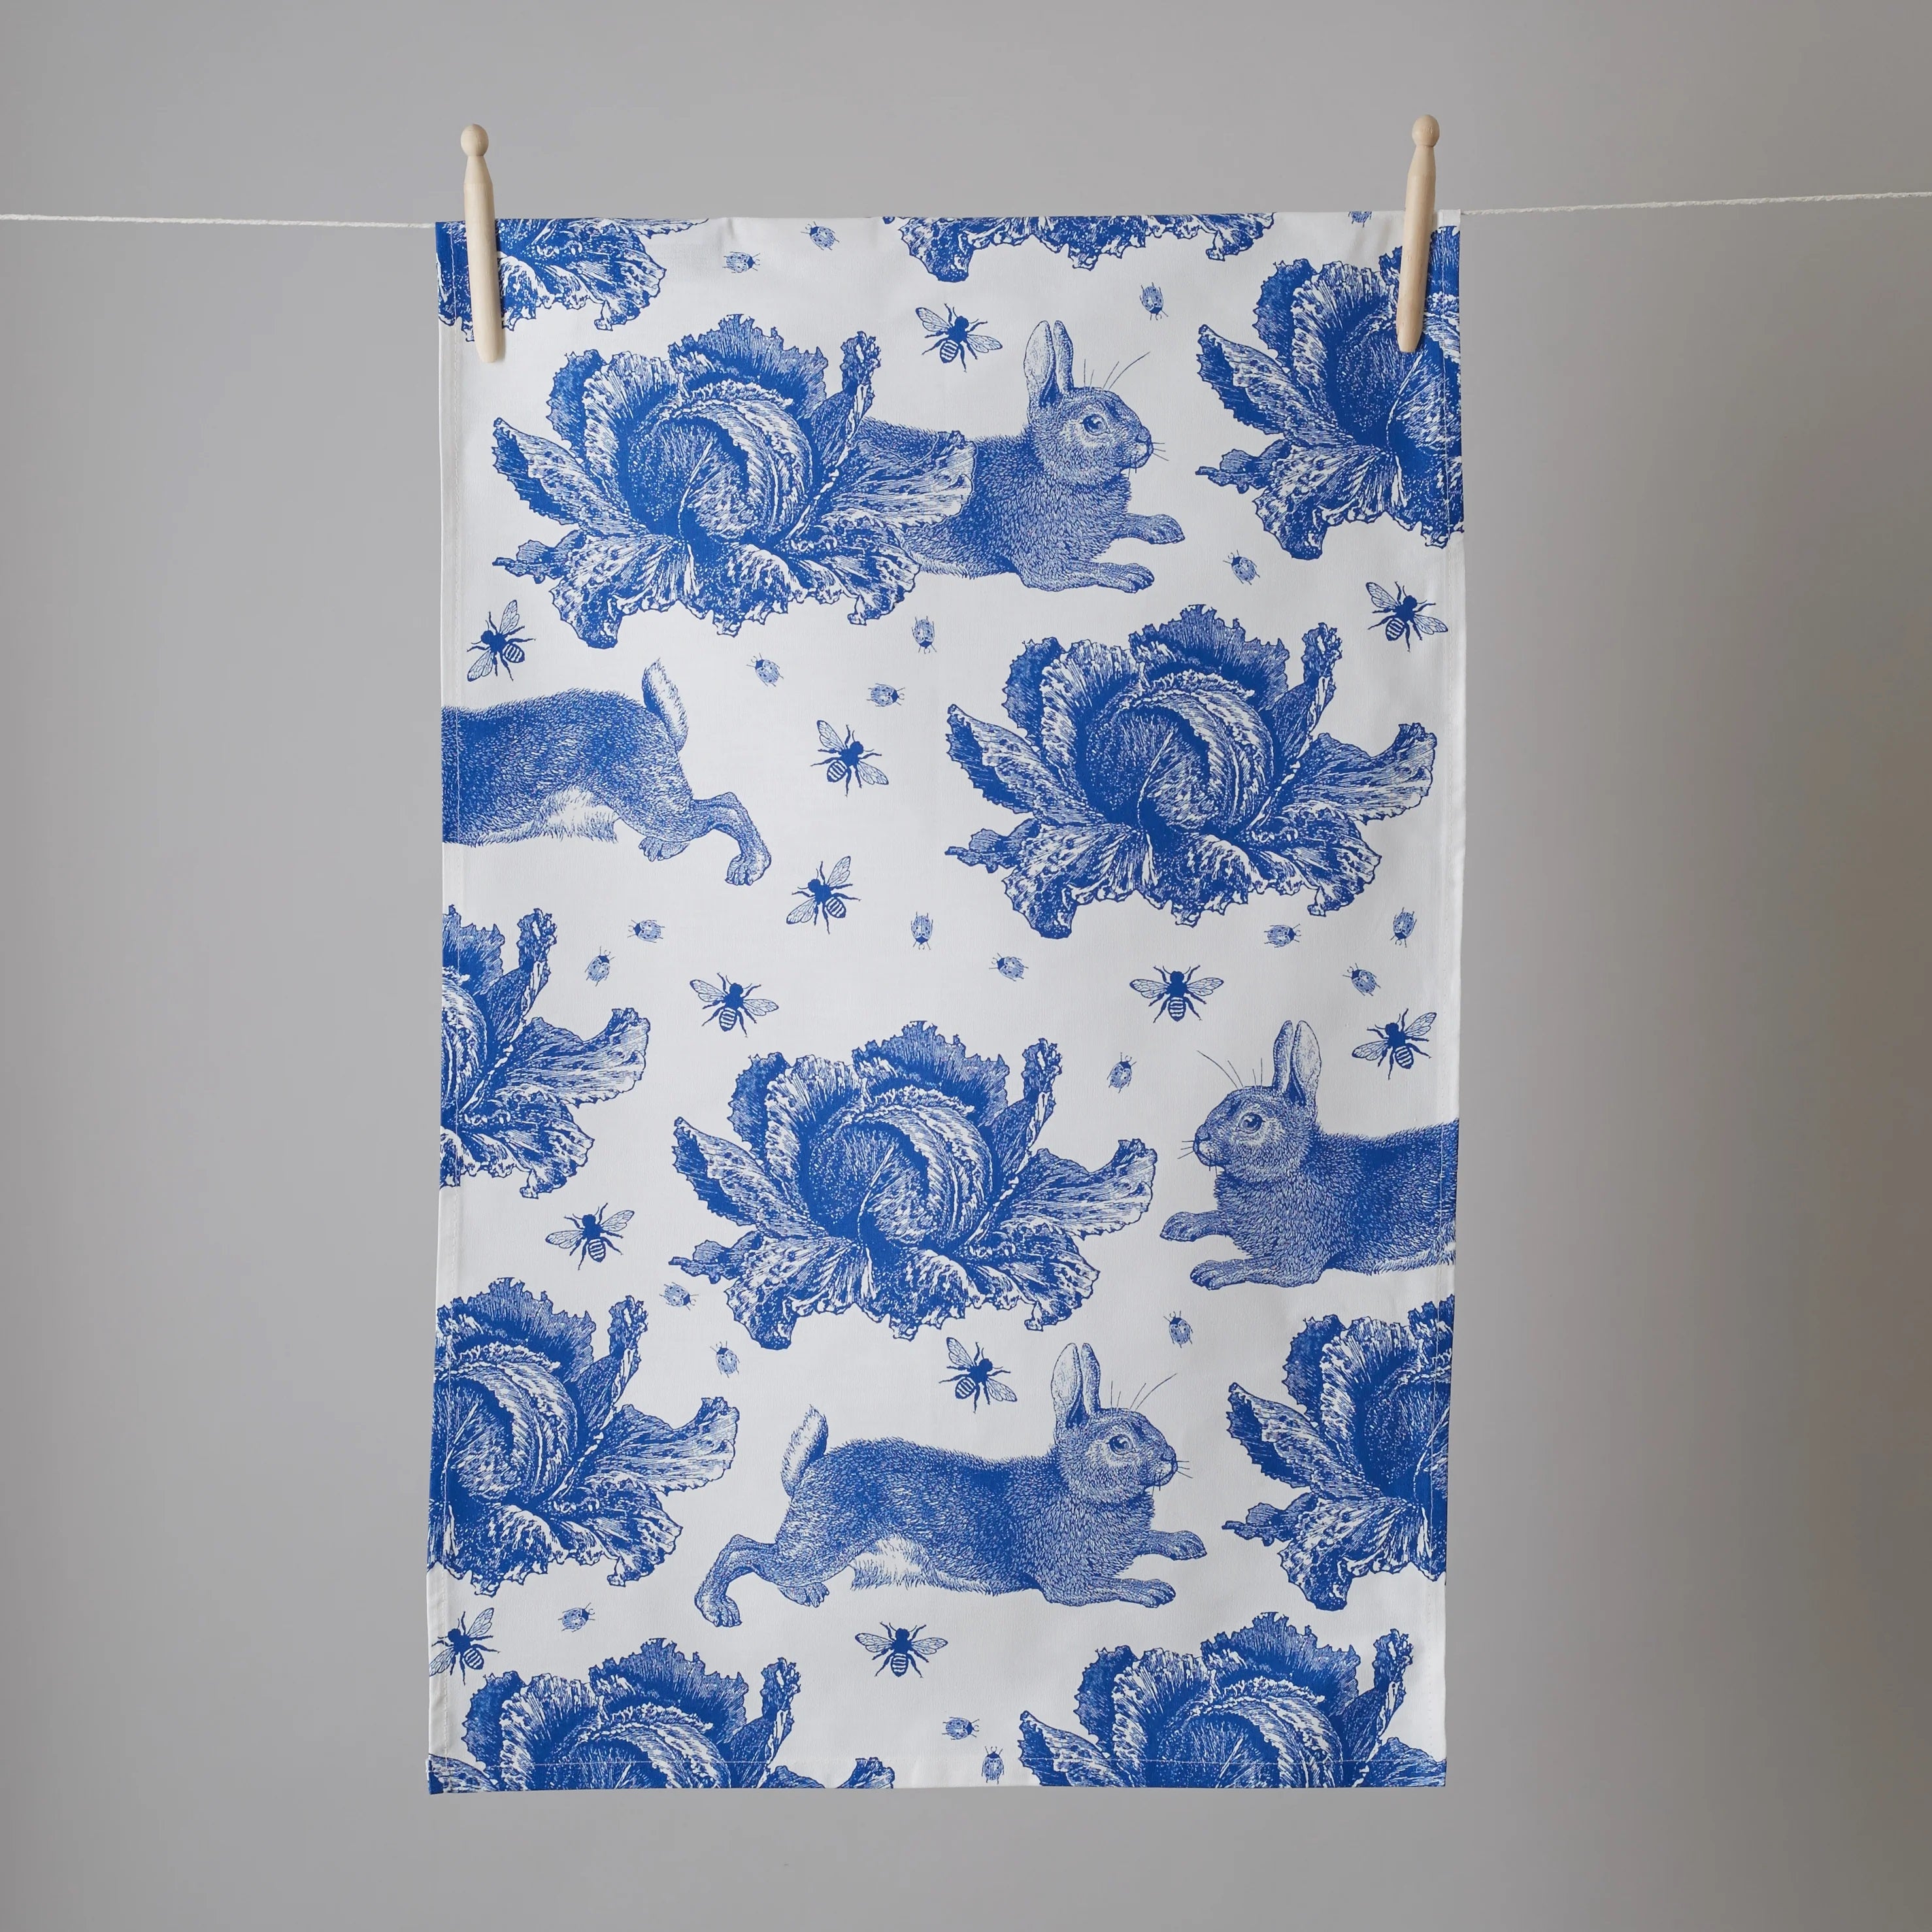 Thornback & Peel "Rabbit & Cabbage Delft Blue", Pure cotton tea towel. Hand printed in the UK.